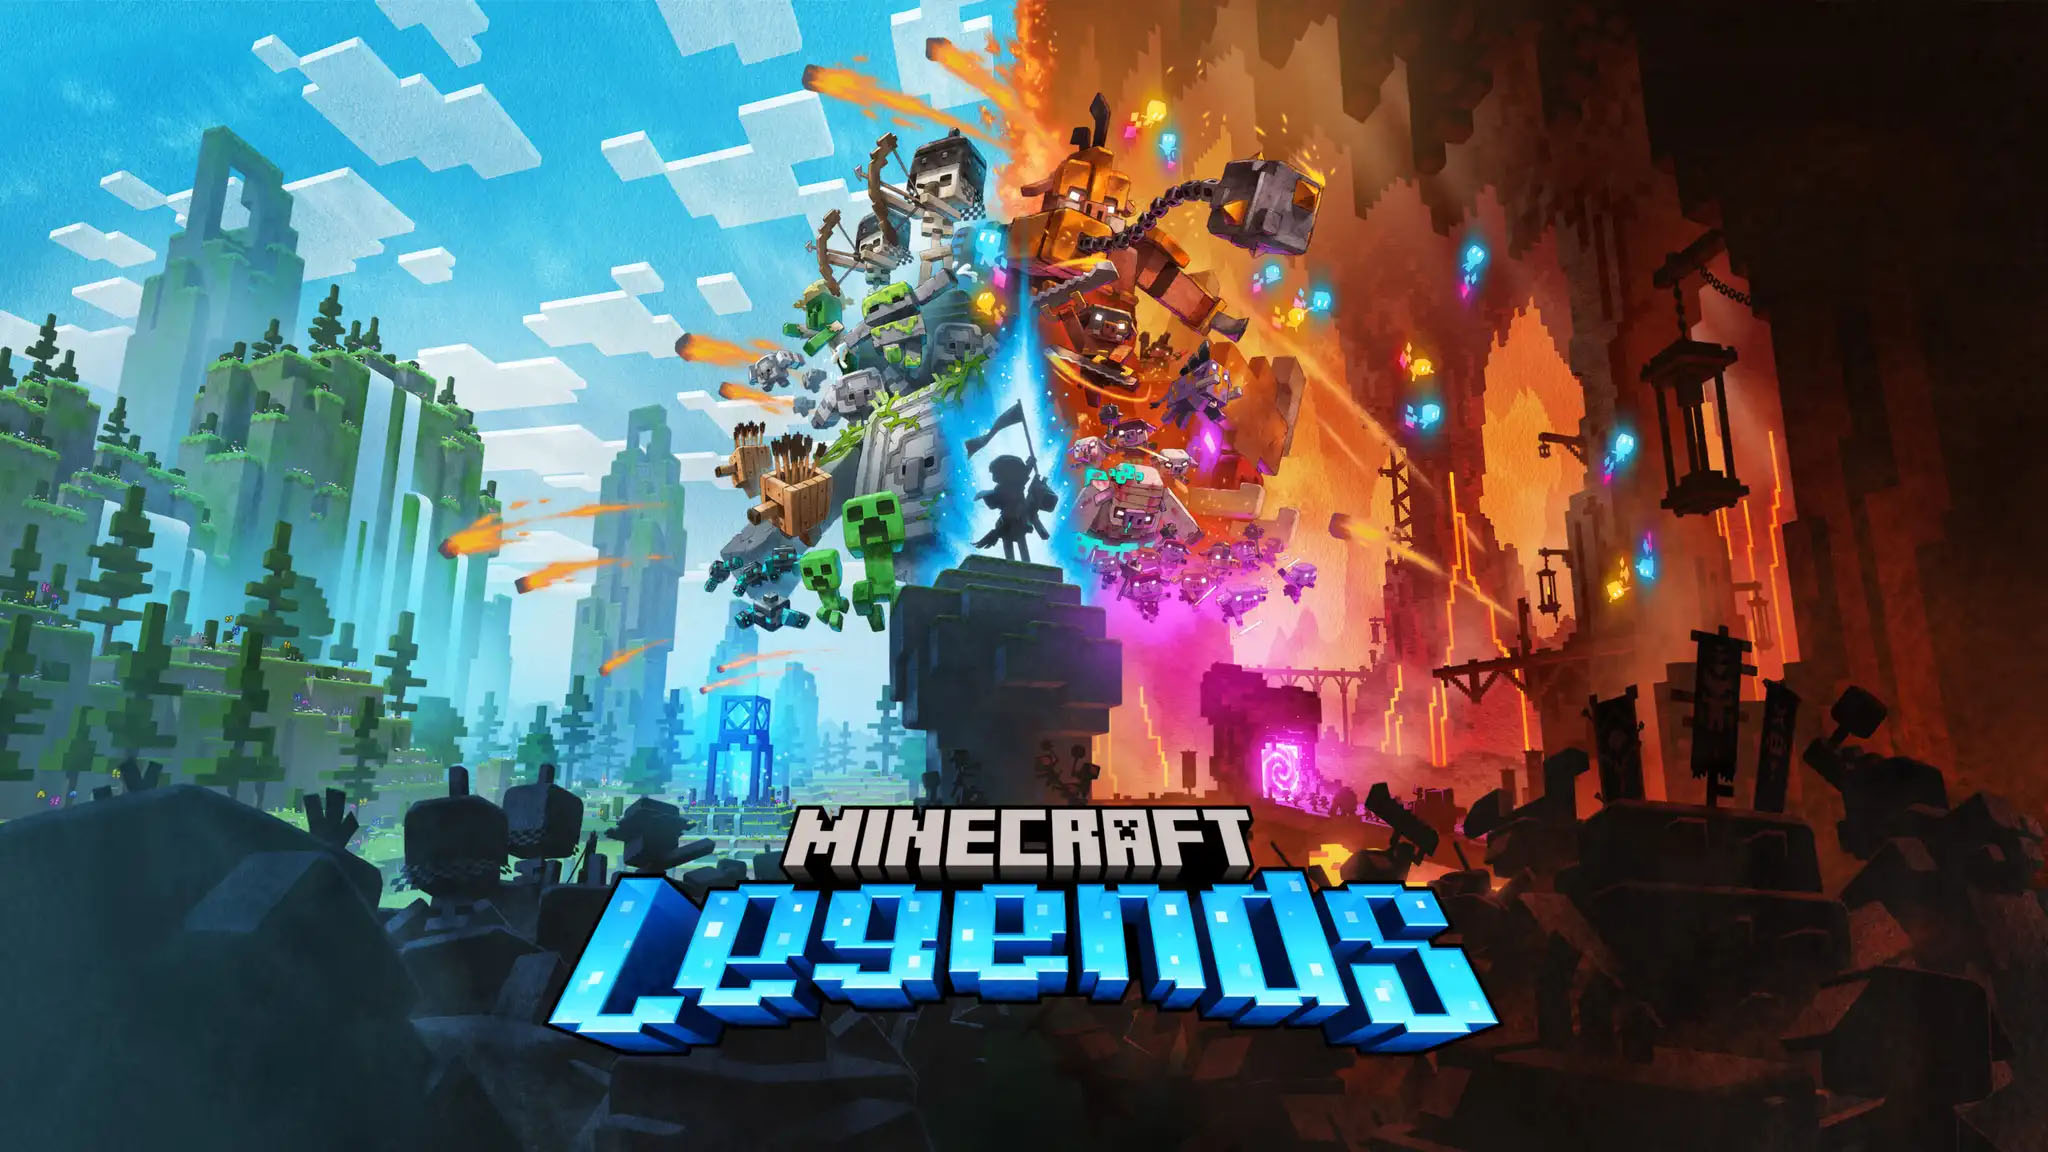 Discover the mysteries of Minecraft Legends. In this action strategy game. Explore a gentle land of rich resources and lush biomes on the brink of destruction. The ravaging piglins have arrived, and it’s up to you to form alliances with new friends and familiar mobs, then lead the charge in epic battles against the fierce piglins to defend the Overworld. You can challenge your friends or team up in intense battles in online play for up to eight players, as you defend your village while leading your units to destroy your opponents’ settlements.